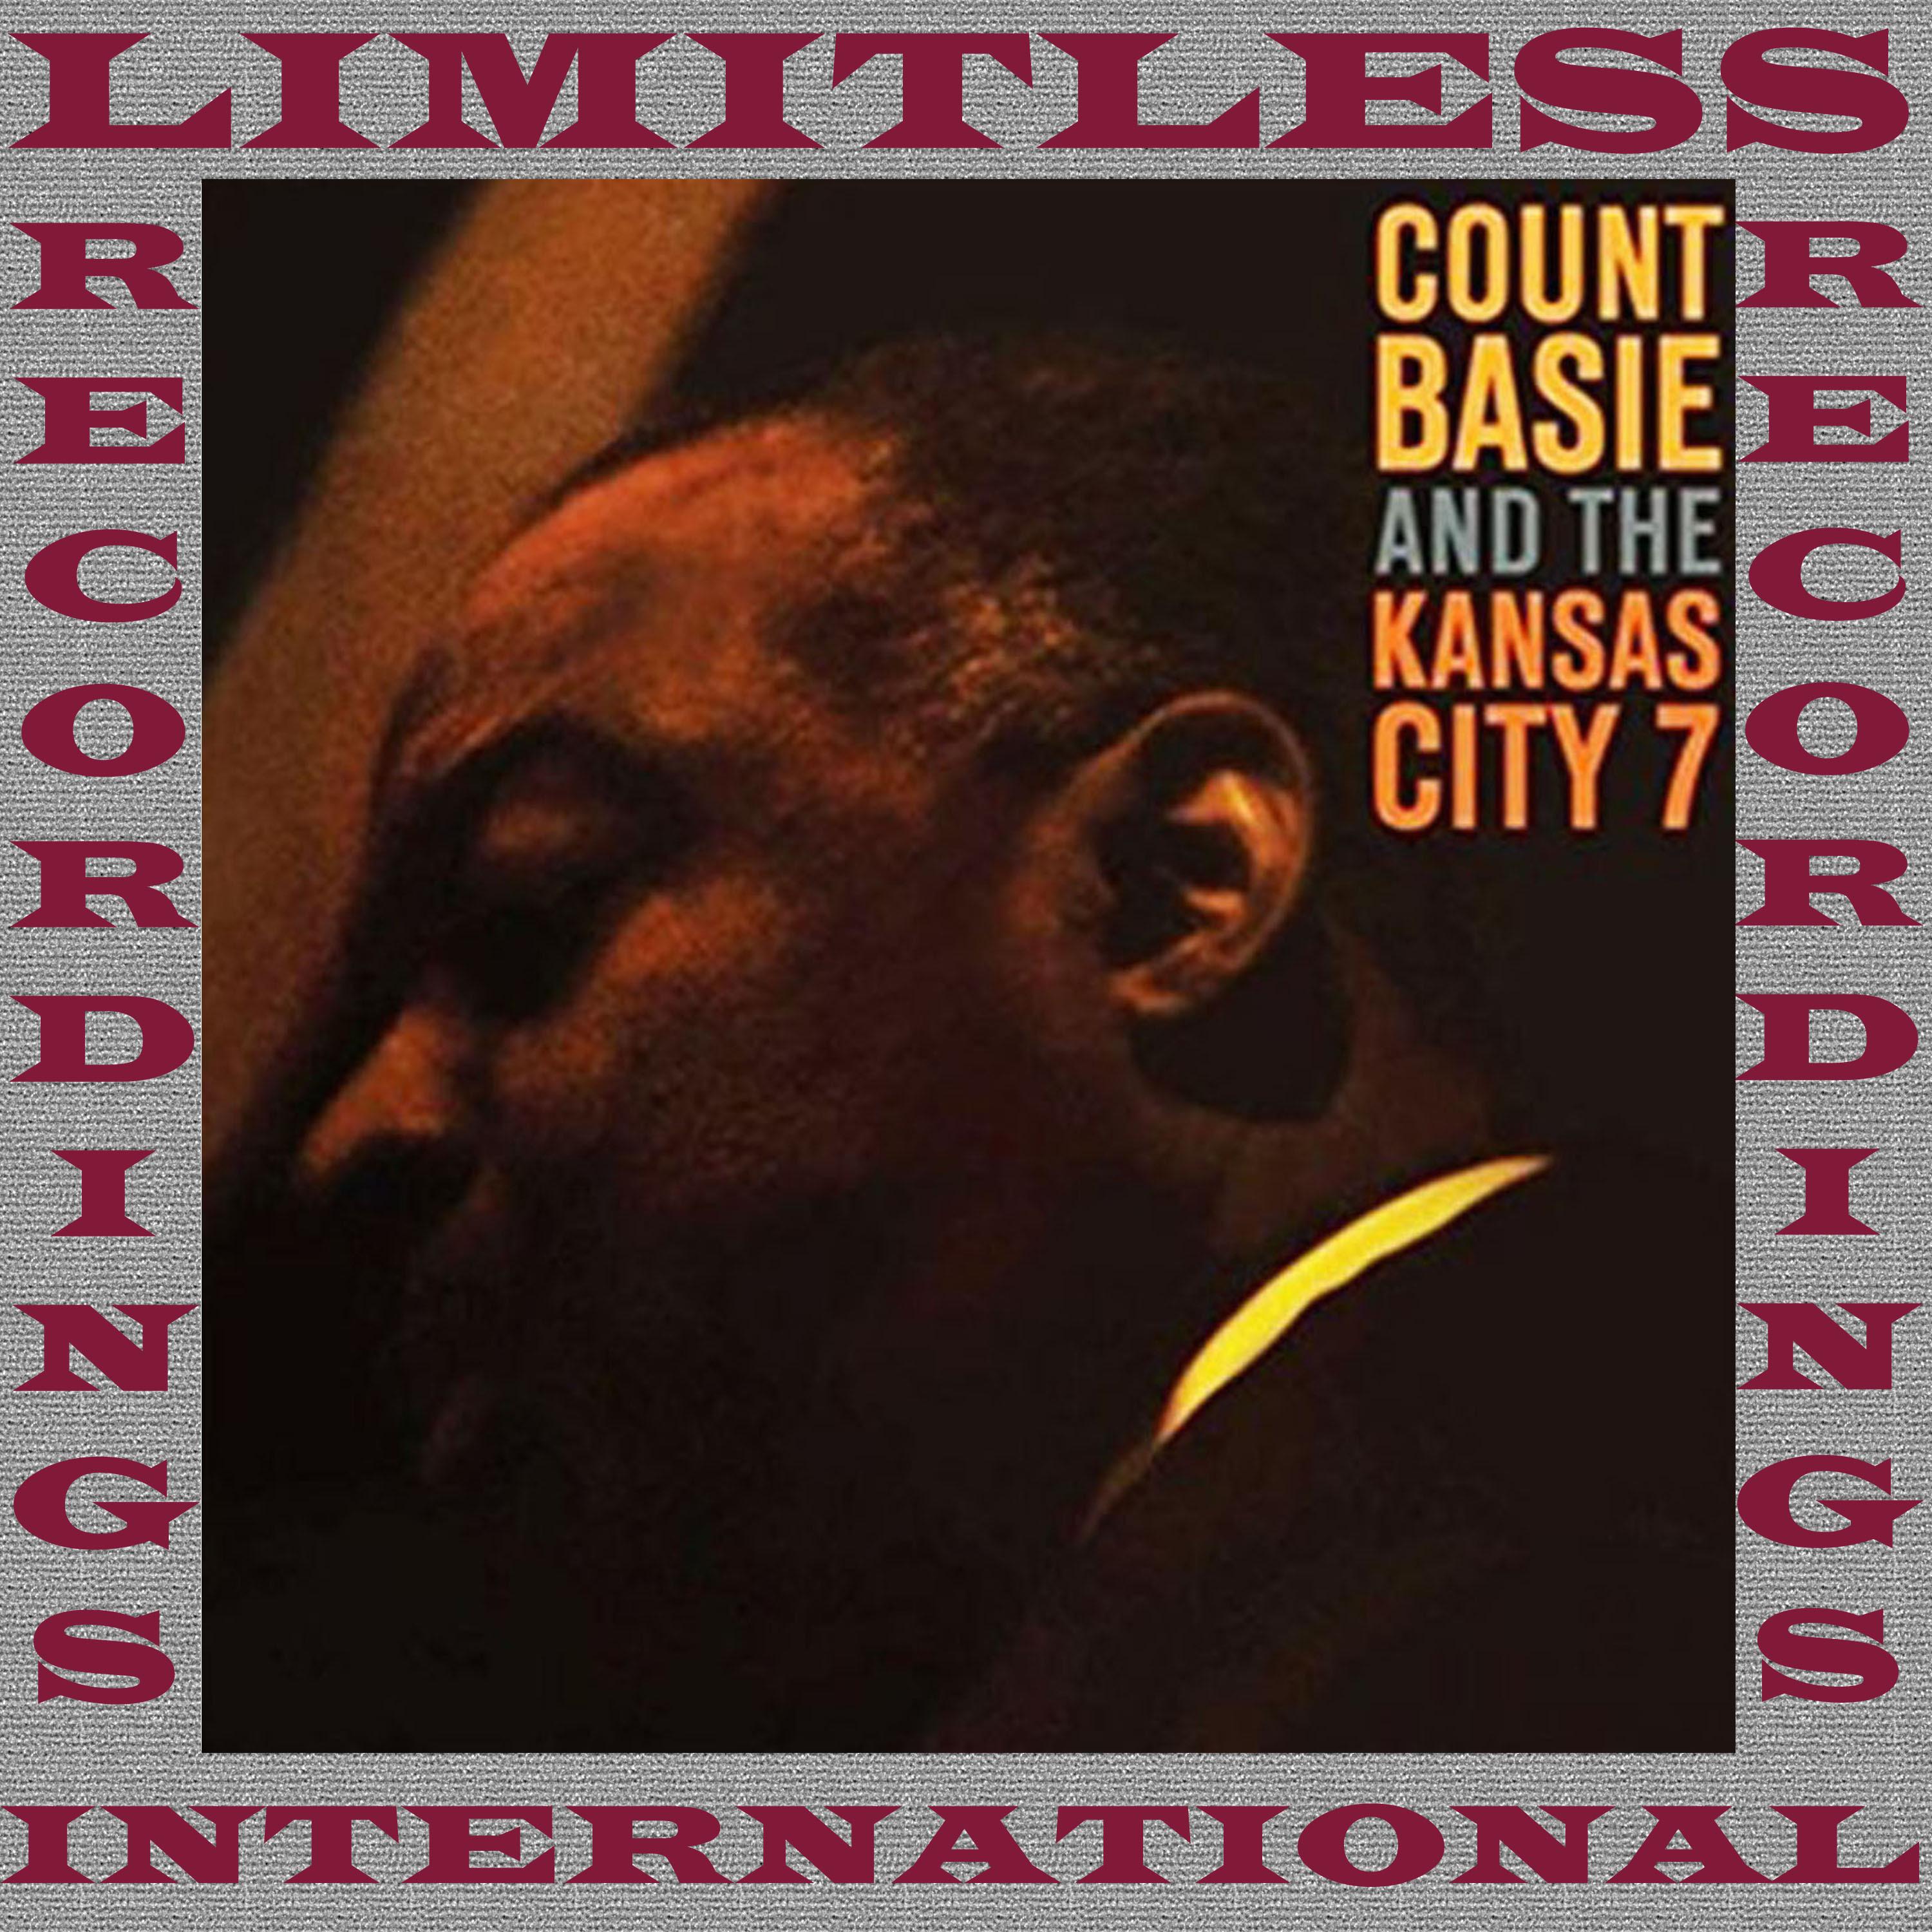 Count Basie And The Kansas City 7 (Expanded, Remastered Version)